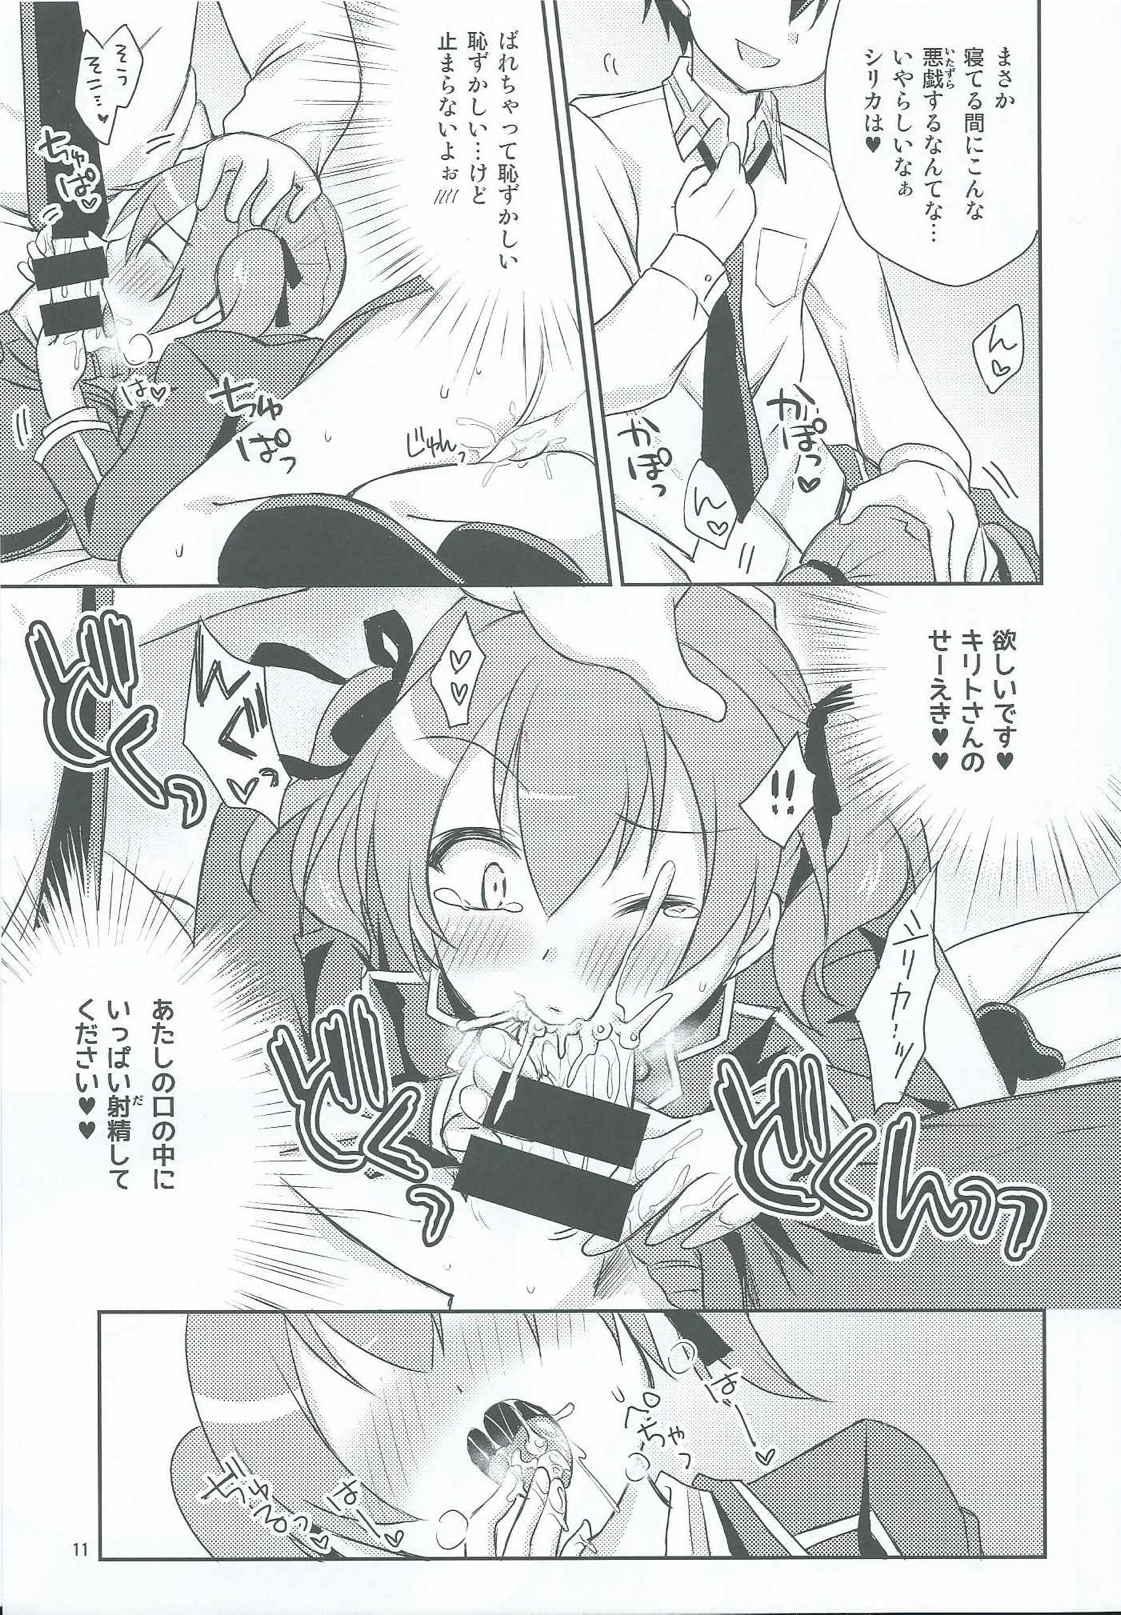 Close Itazura Silica-chan - Sword art online Whipping - Page 9